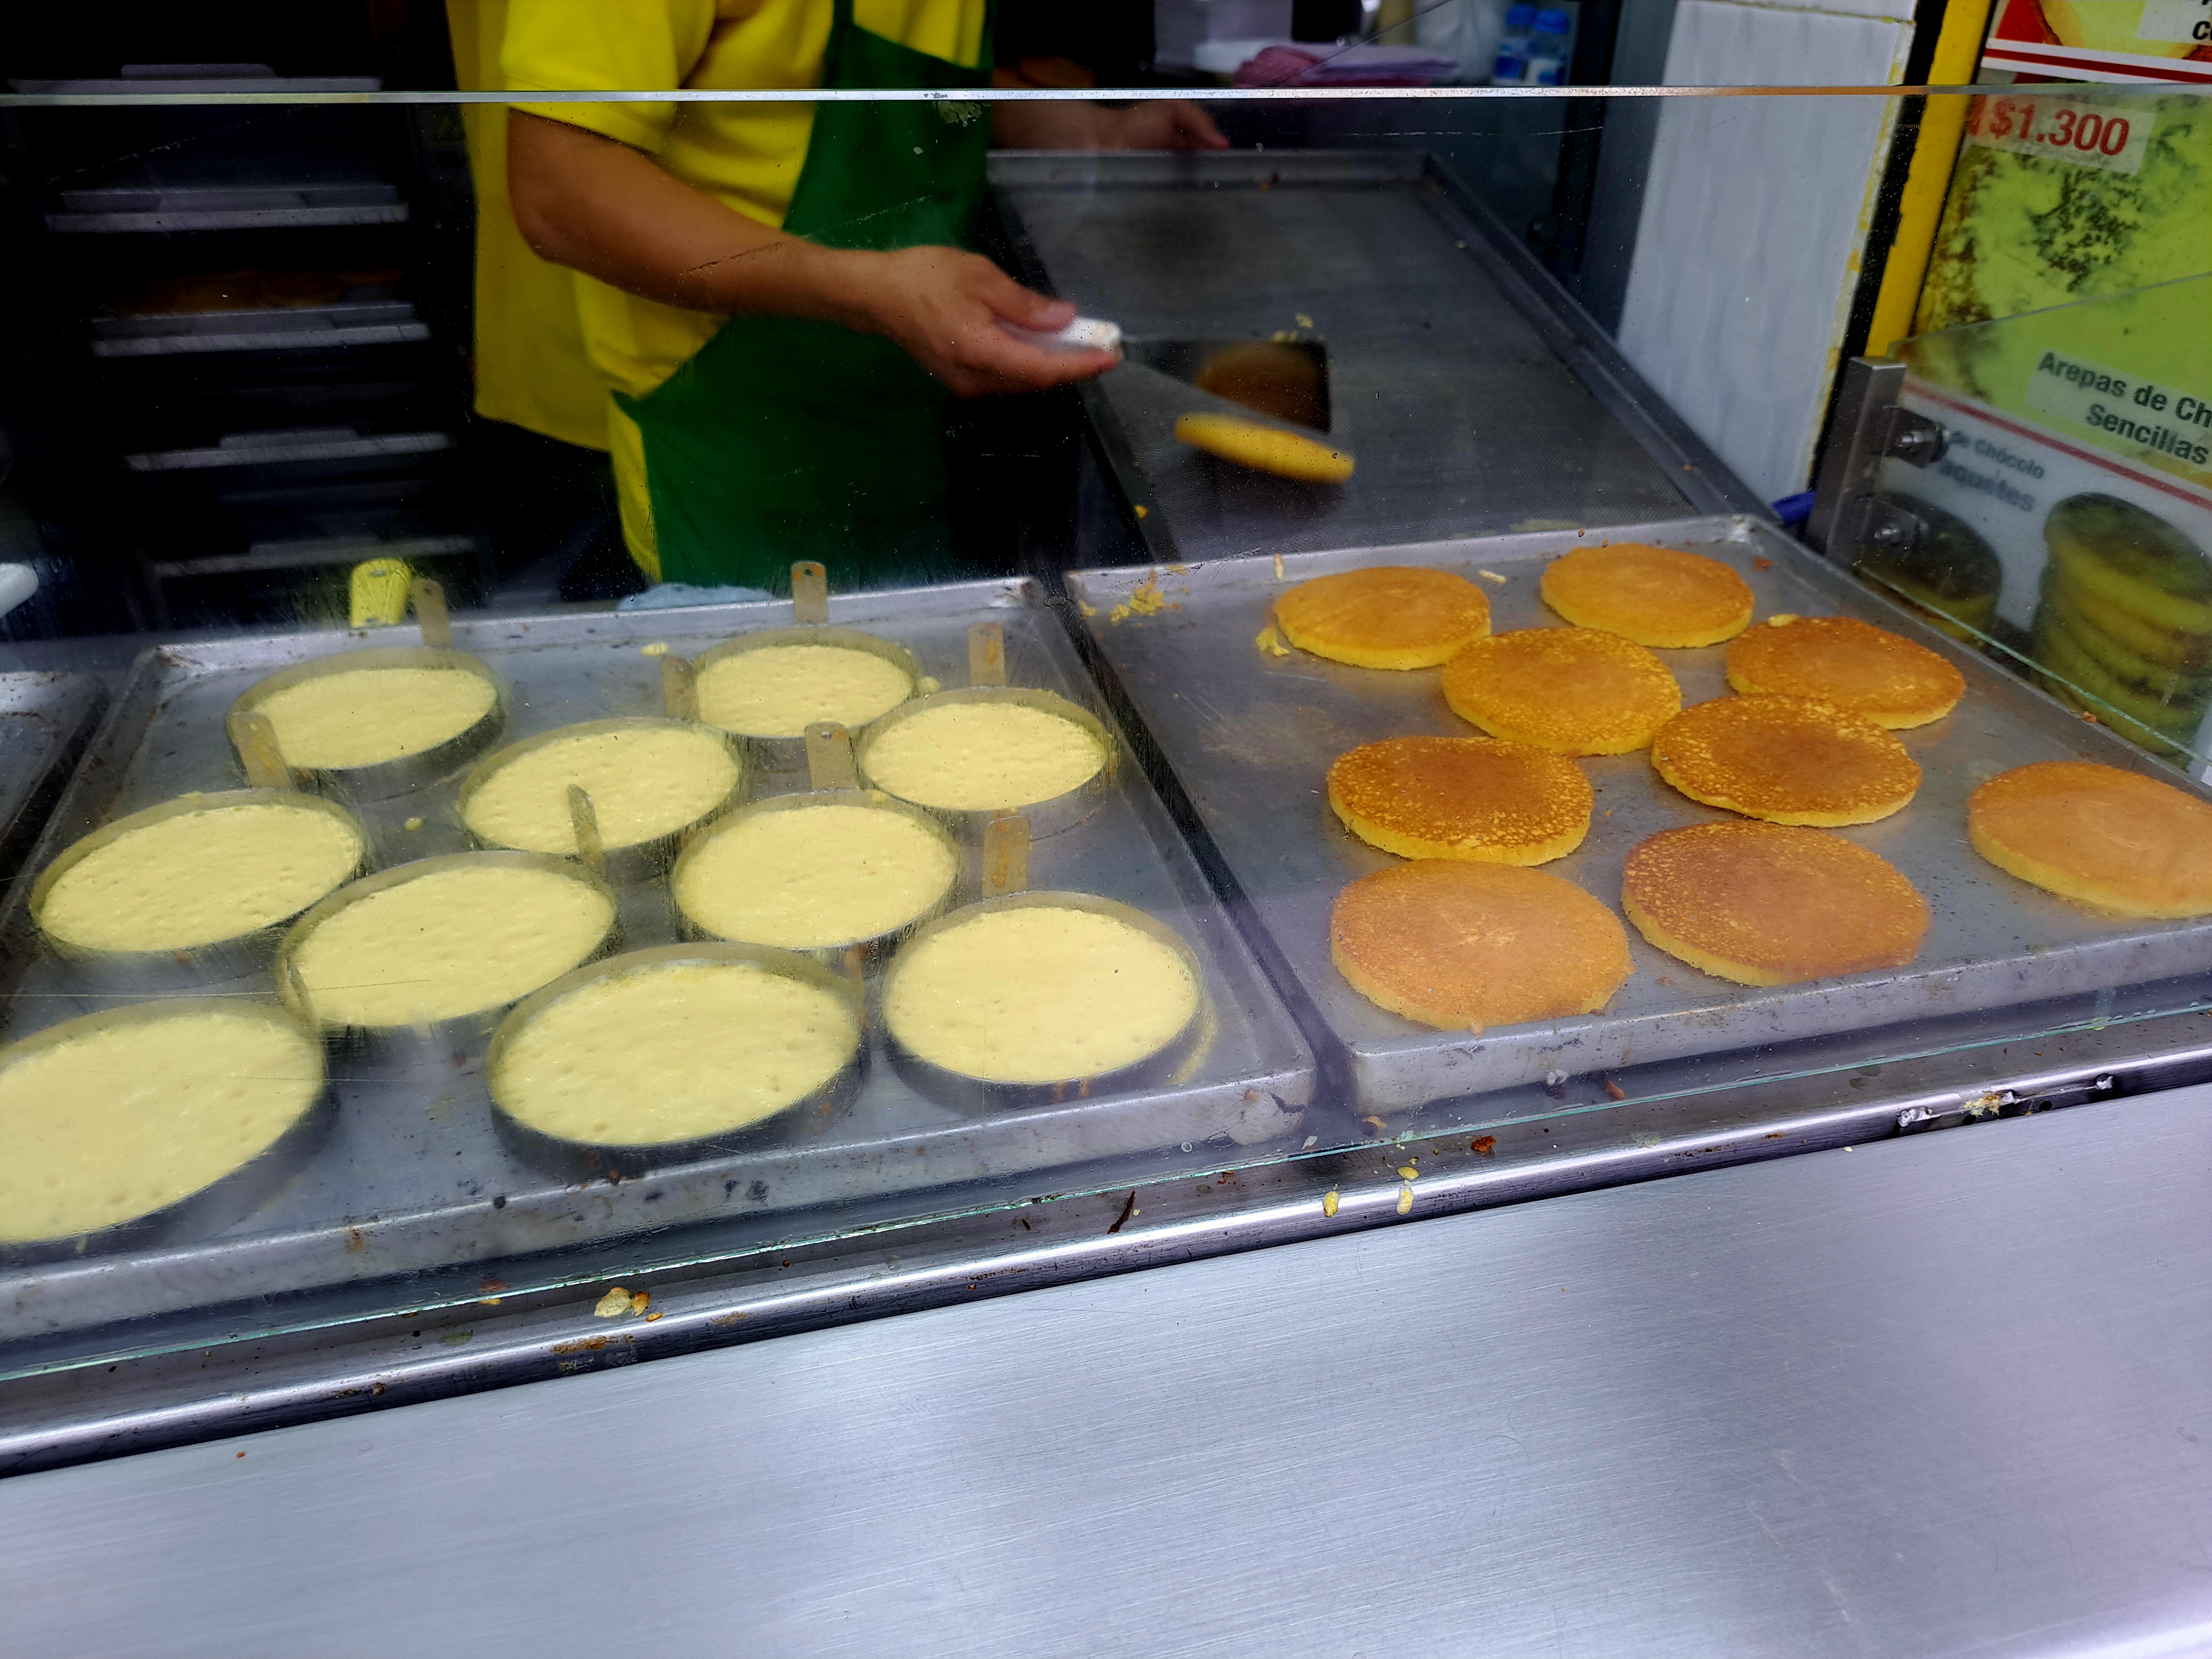 Cheese arepas, local treats that'll cancel out any calories you burn peddling on an e-bike